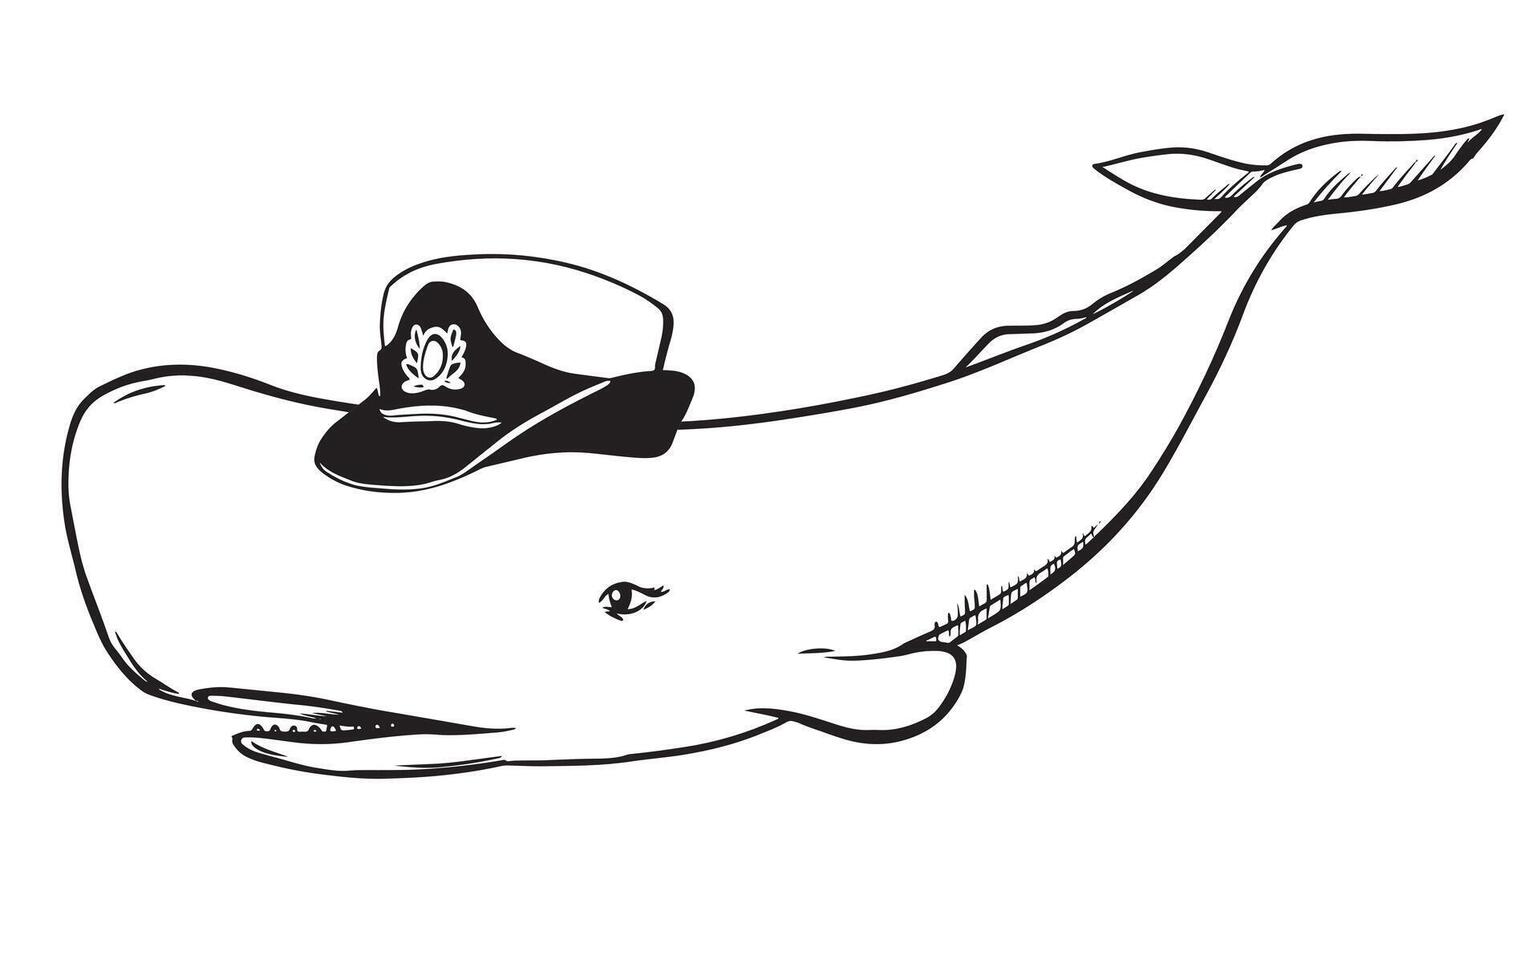 A white sperm whale in a women's uniform naval cap. Creative illustration of a female sperm whale in the role of an official. Caricature of the officer corps. Old school tattoo sketch, t-shirt prints vector